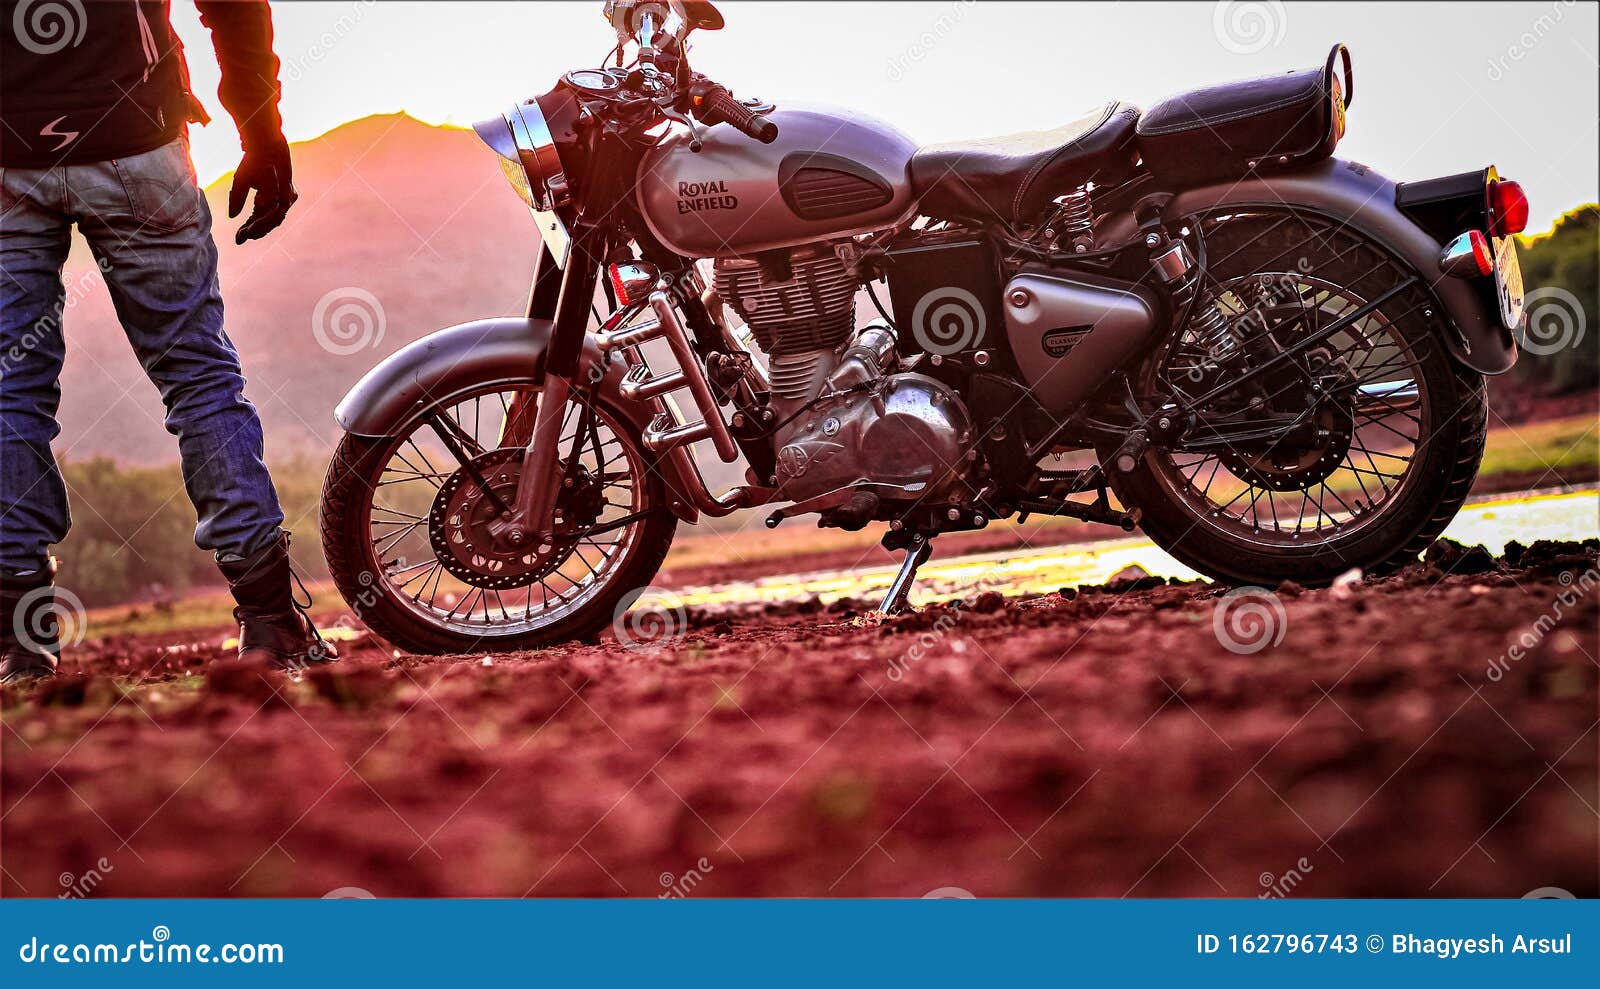 ROYAL ENFIELD CLASSIC Wallpaper Editorial Stock Photo - Image of nature,  enfield: 162796743